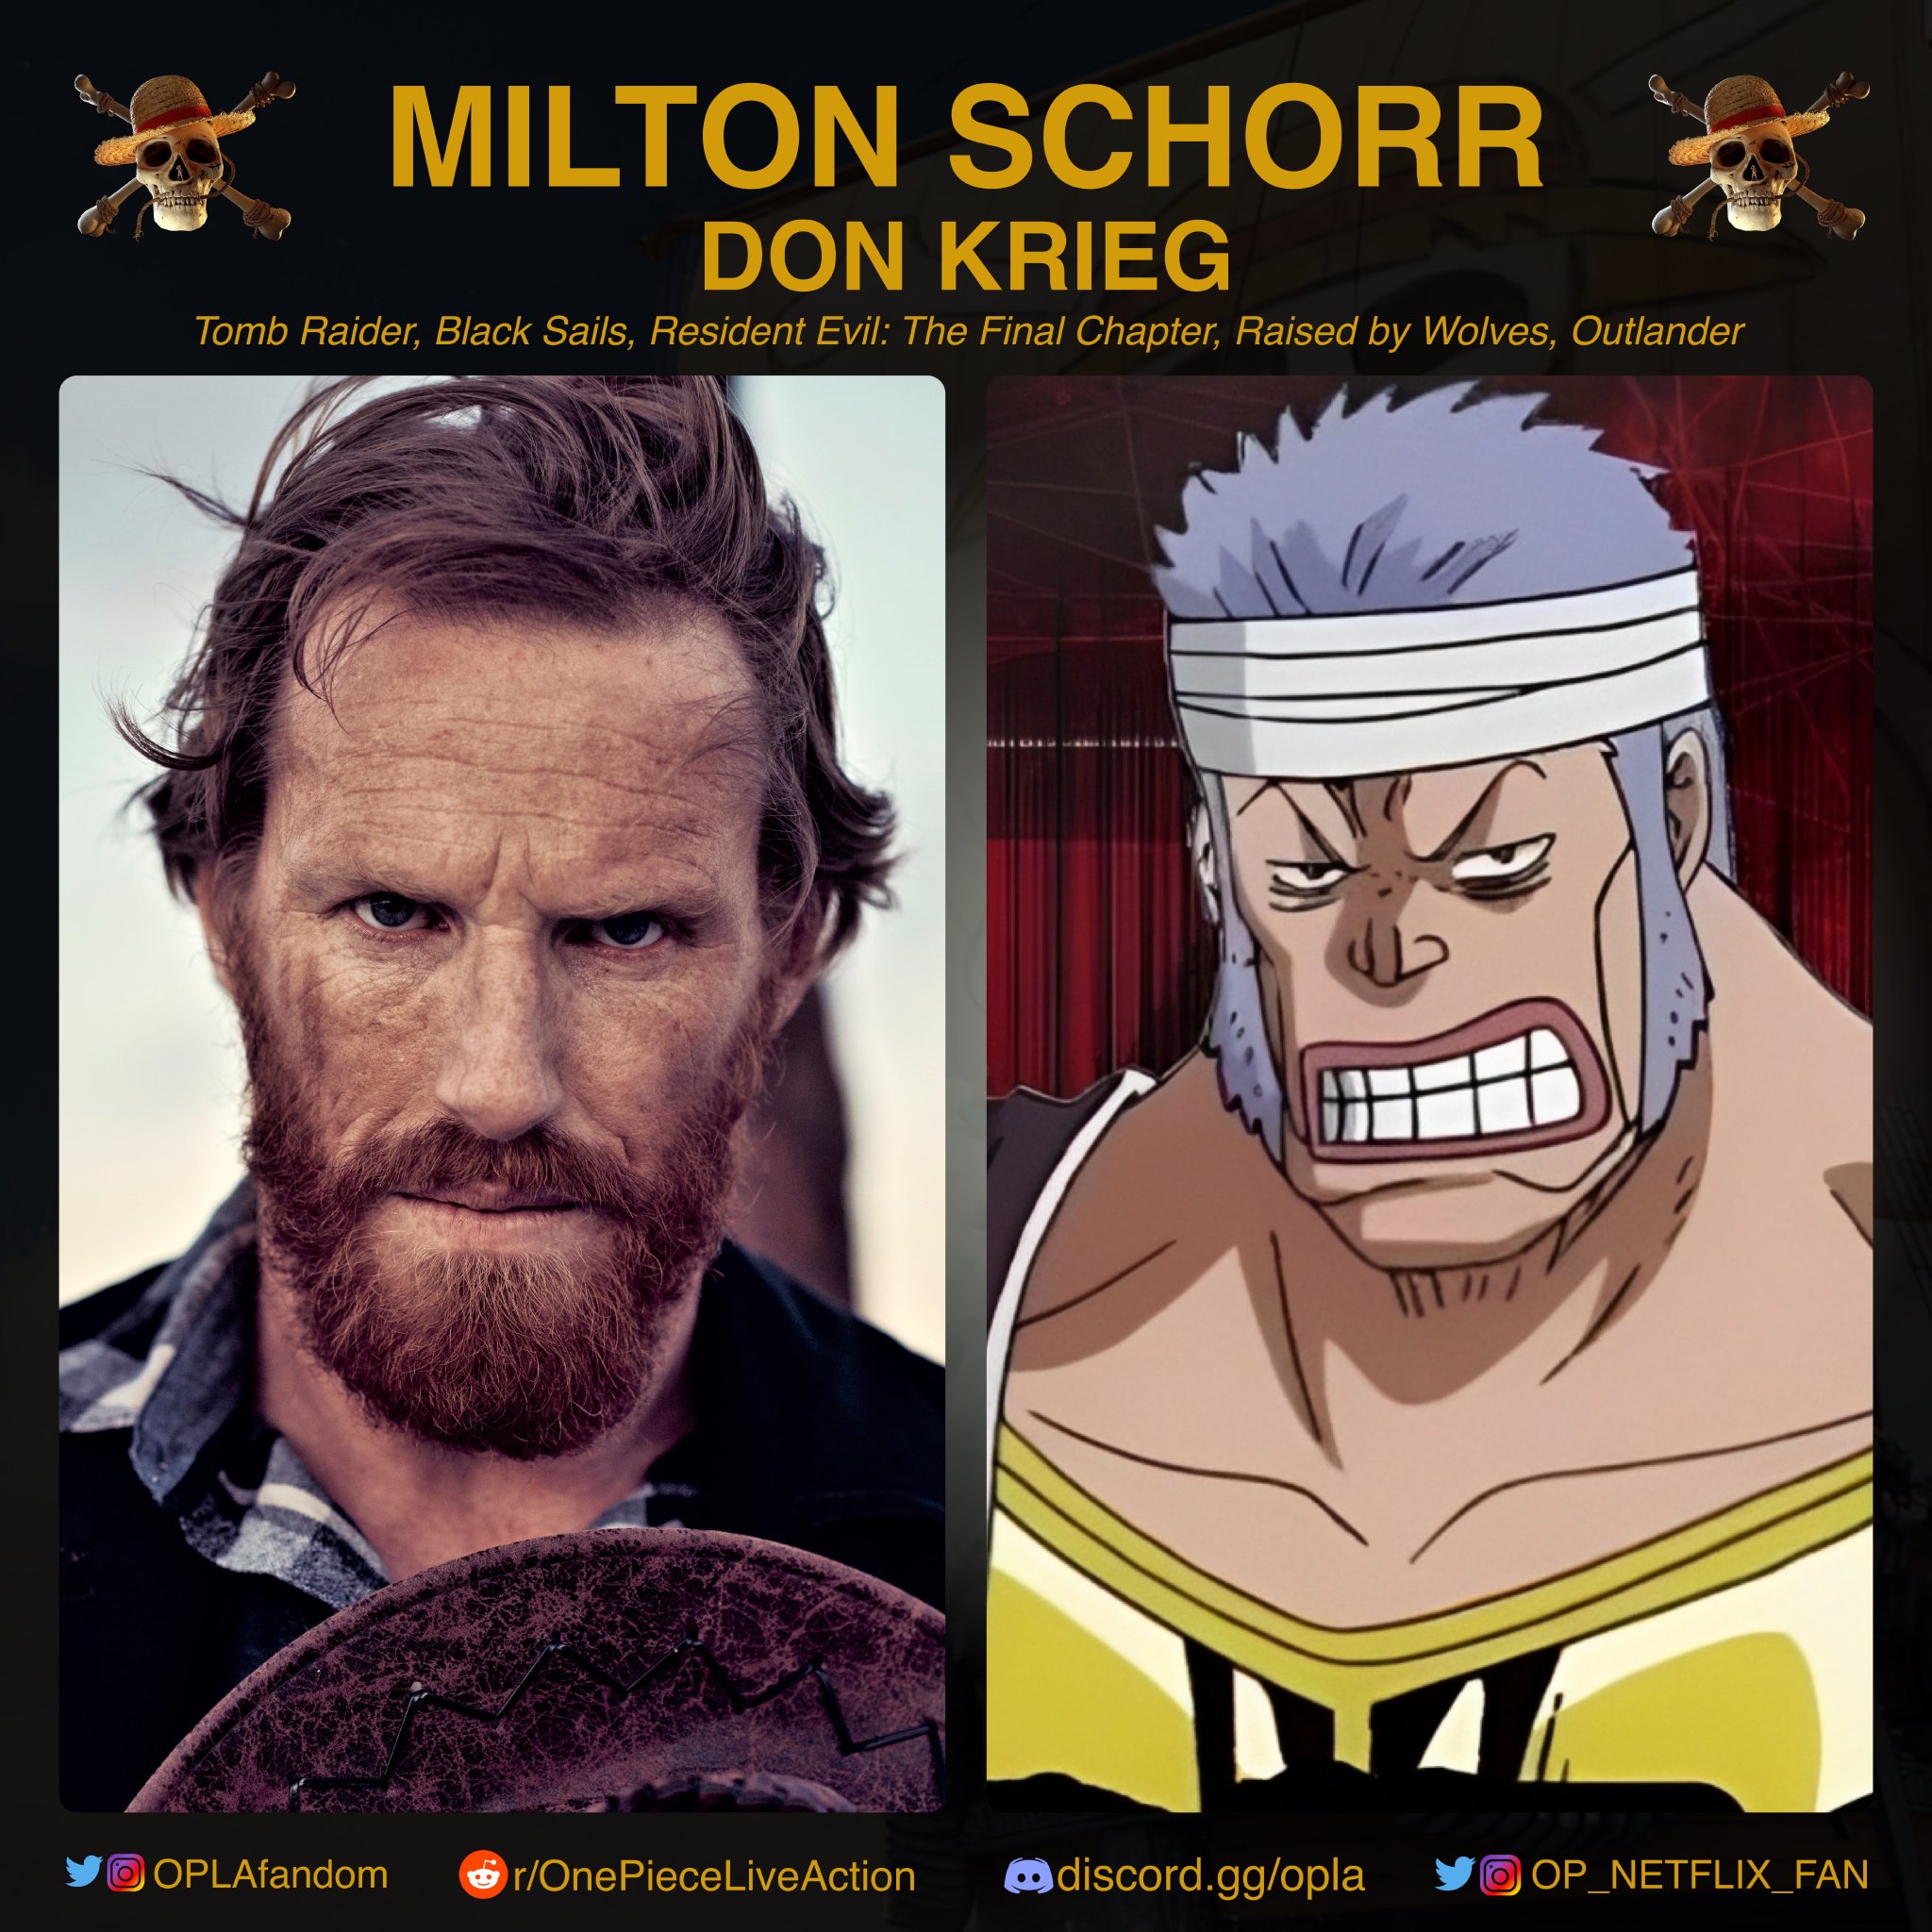 ONE PIECE NETFLIX FAN on X: Milton Schorr will be playing the role of Don  Krieg in One Piece Live Action  / X